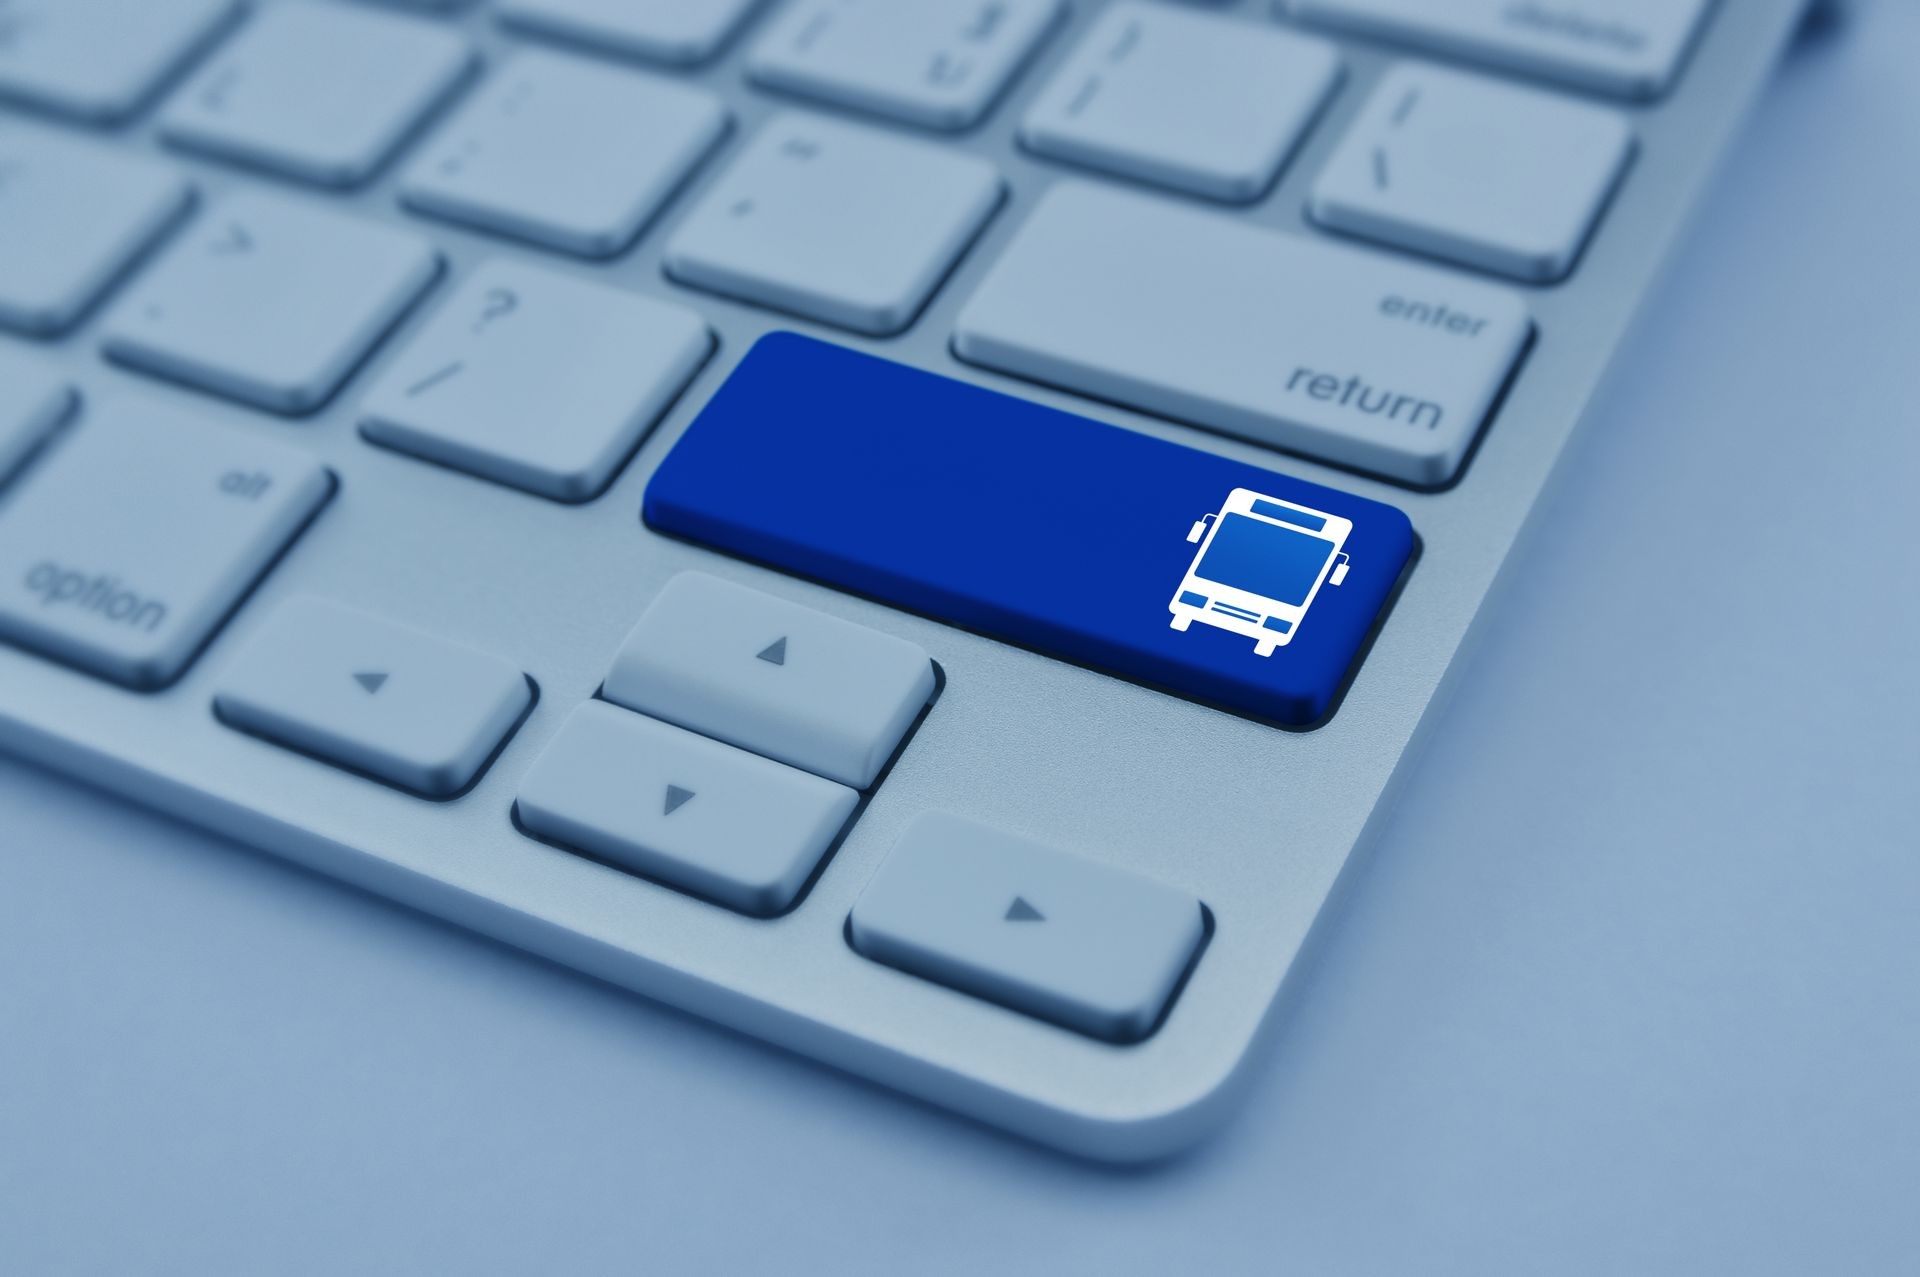 Bus flat icon on modern computer keyboard button, Internet business transportation service concept